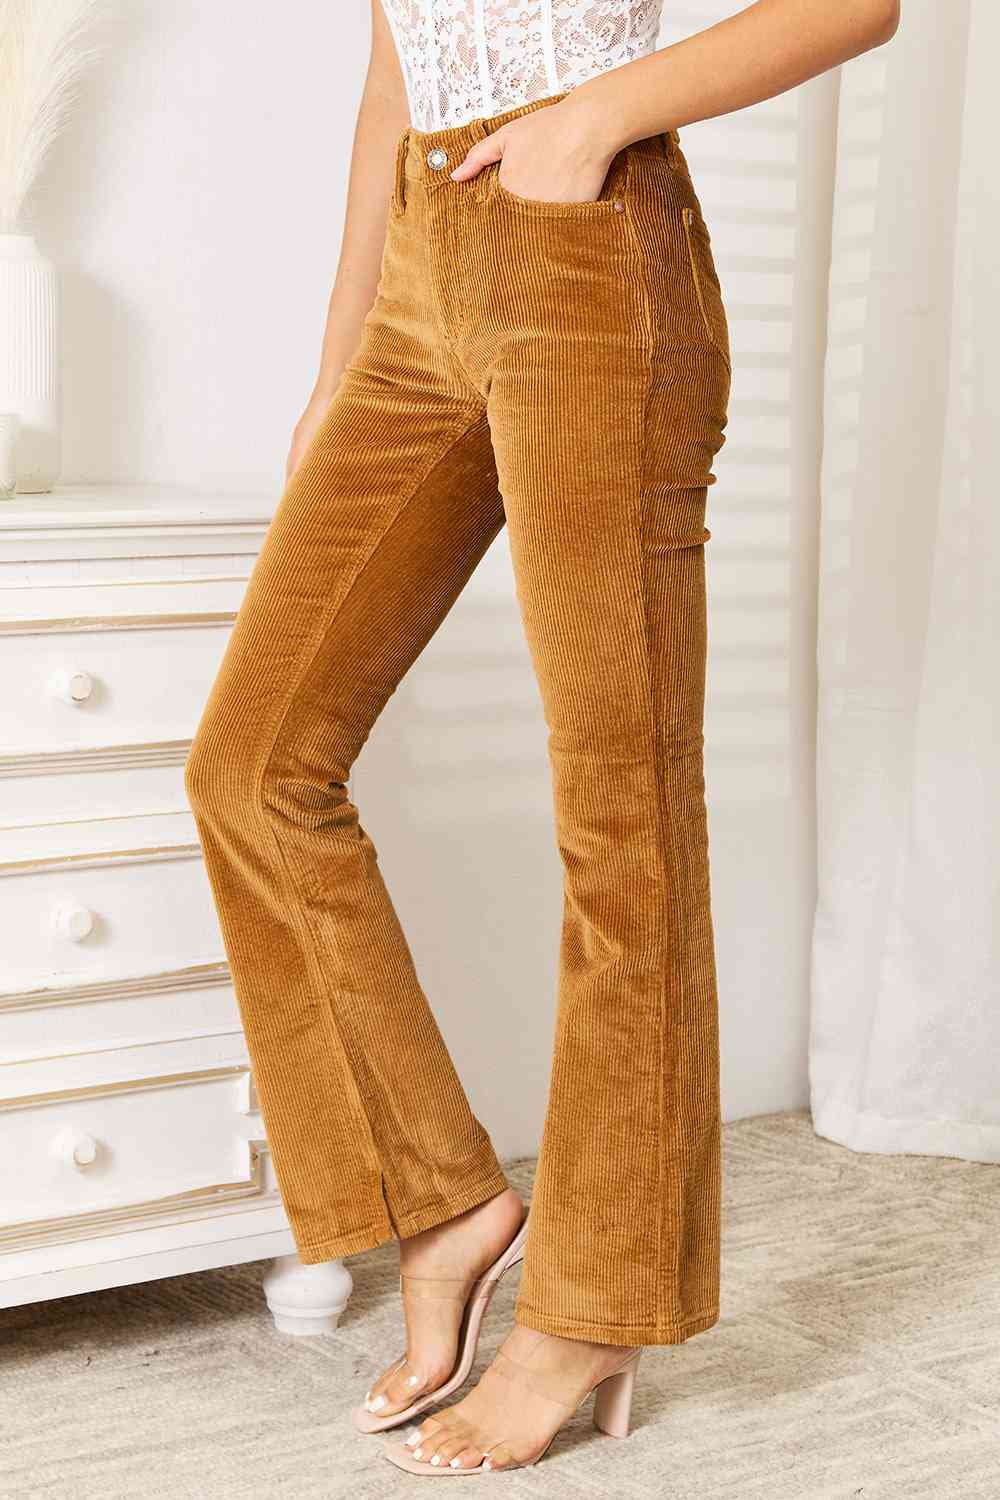 Mid Rise Corduroy Pants - Kawaii Stop - Camel Color, Casual, Classic Bootcut, Comfortable Fit, Corduroy Pants, Cotton Blend, Judy Blue, Machine Wash, Mid Rise, Opaque Material, Pants, Semi-Formal, Ship from USA, Stylish, Timeless Elegance, Tumble Dry, Versatile